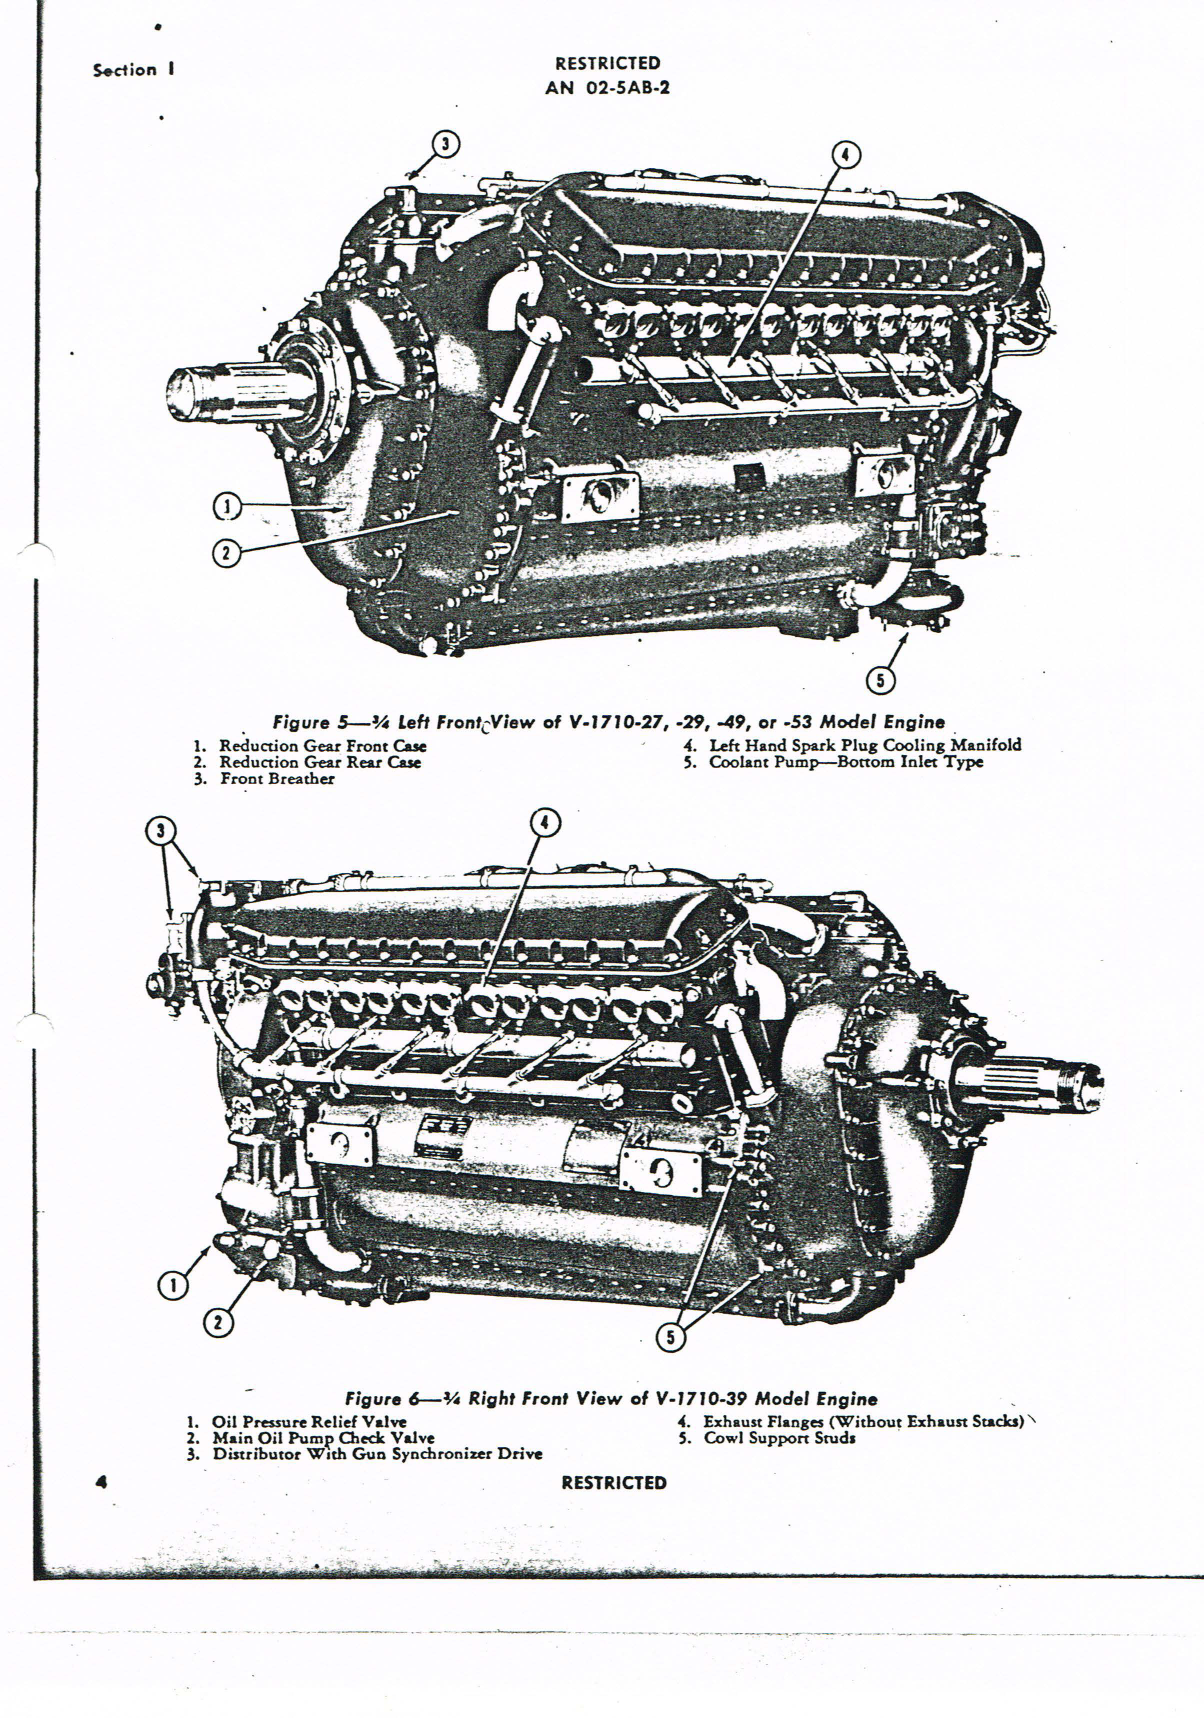 Sample page 8 from AirCorps Library document: Service Instructions for V-1710 Series